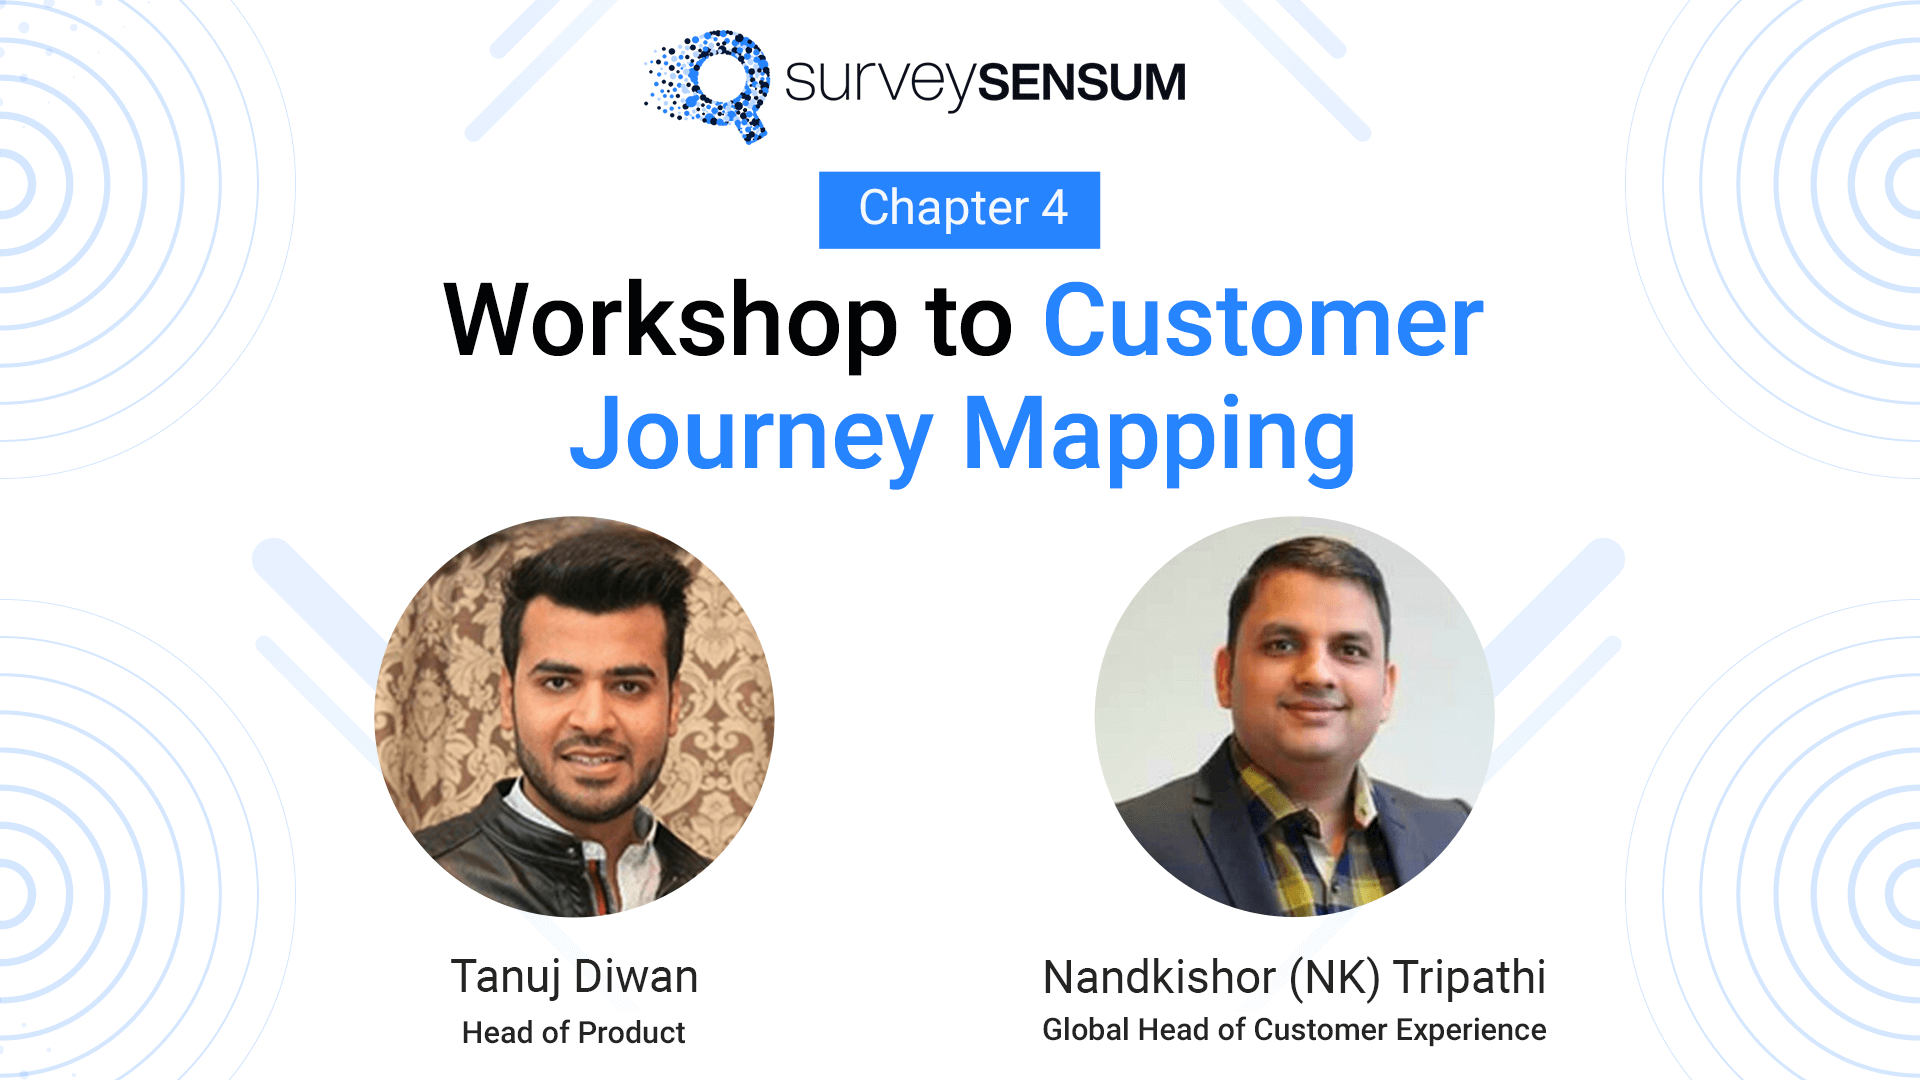 Chapter 4: How to run a Customer Journey Mapping Workshop